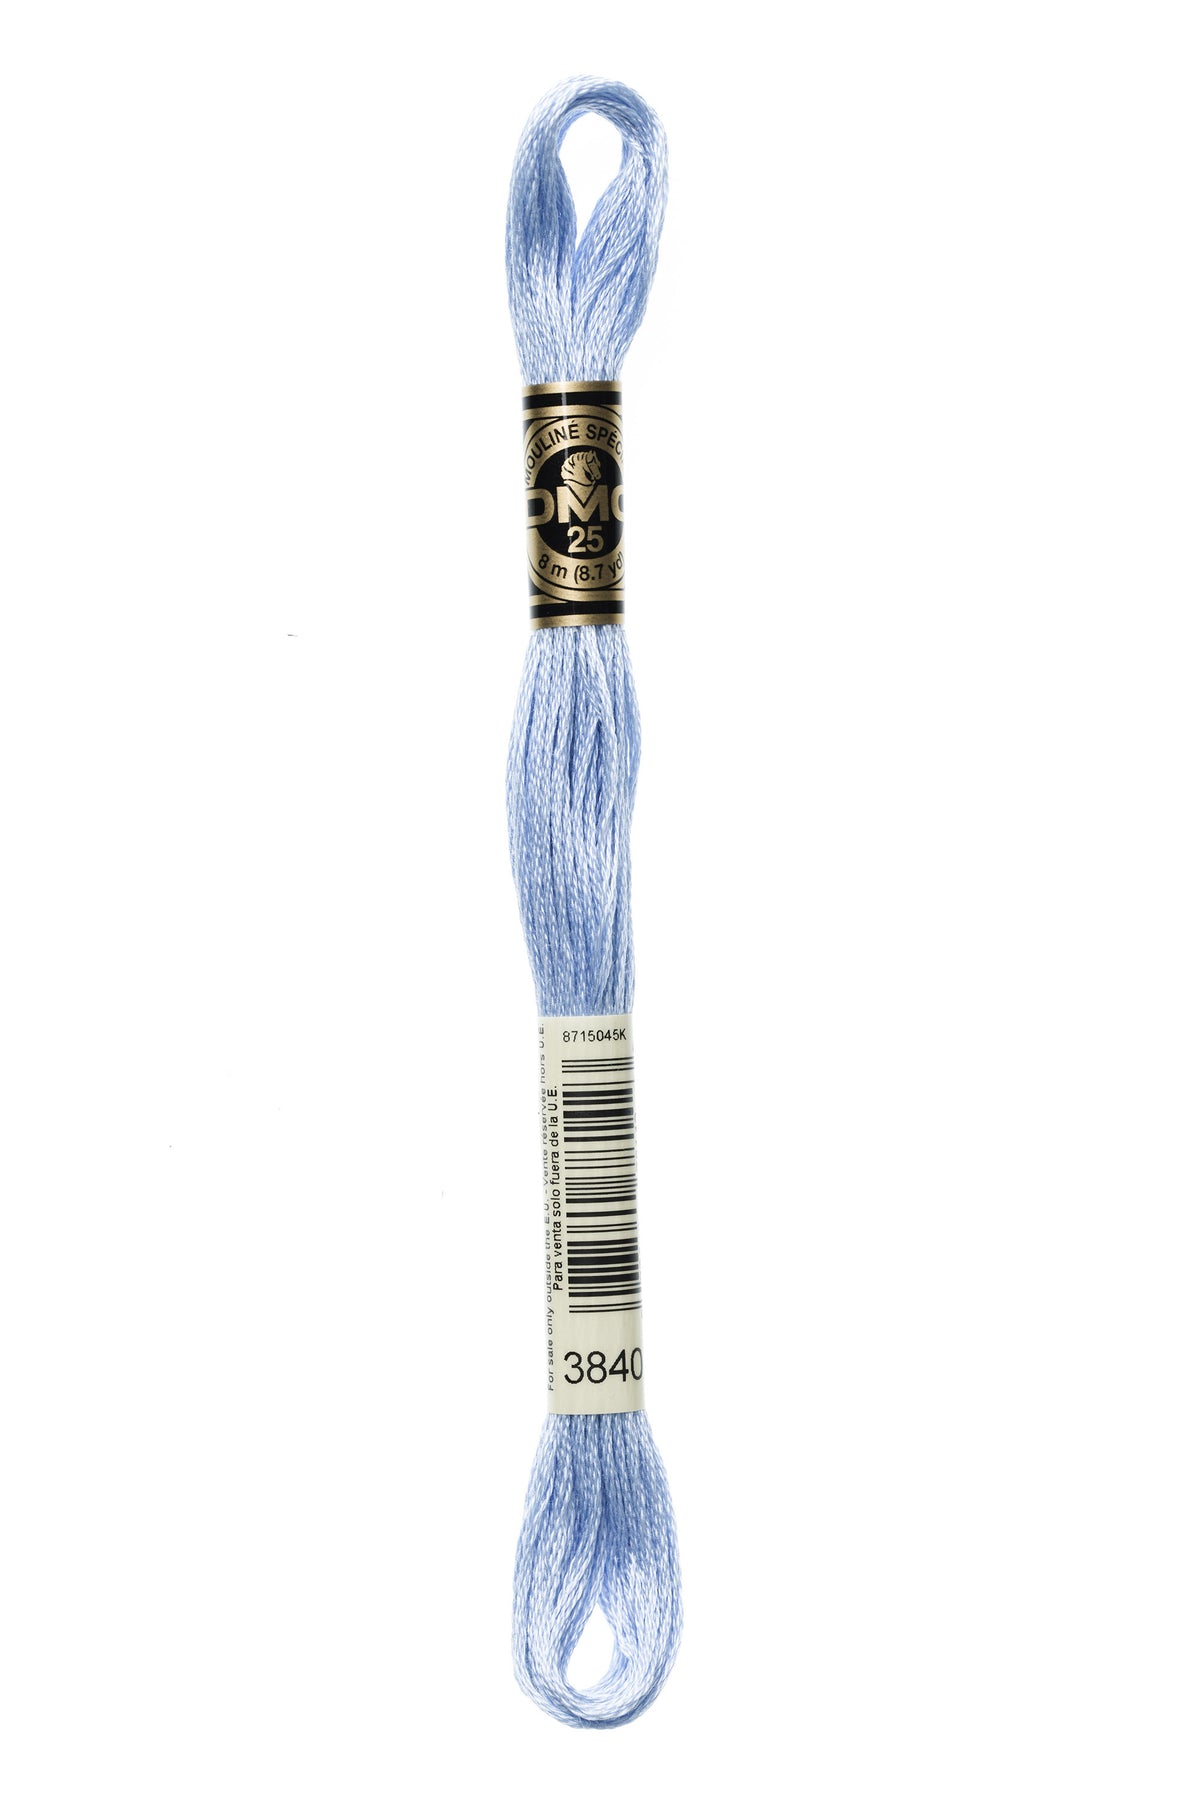 Cotton Six Stranded Embroidery Floss | DMC 3689-3855